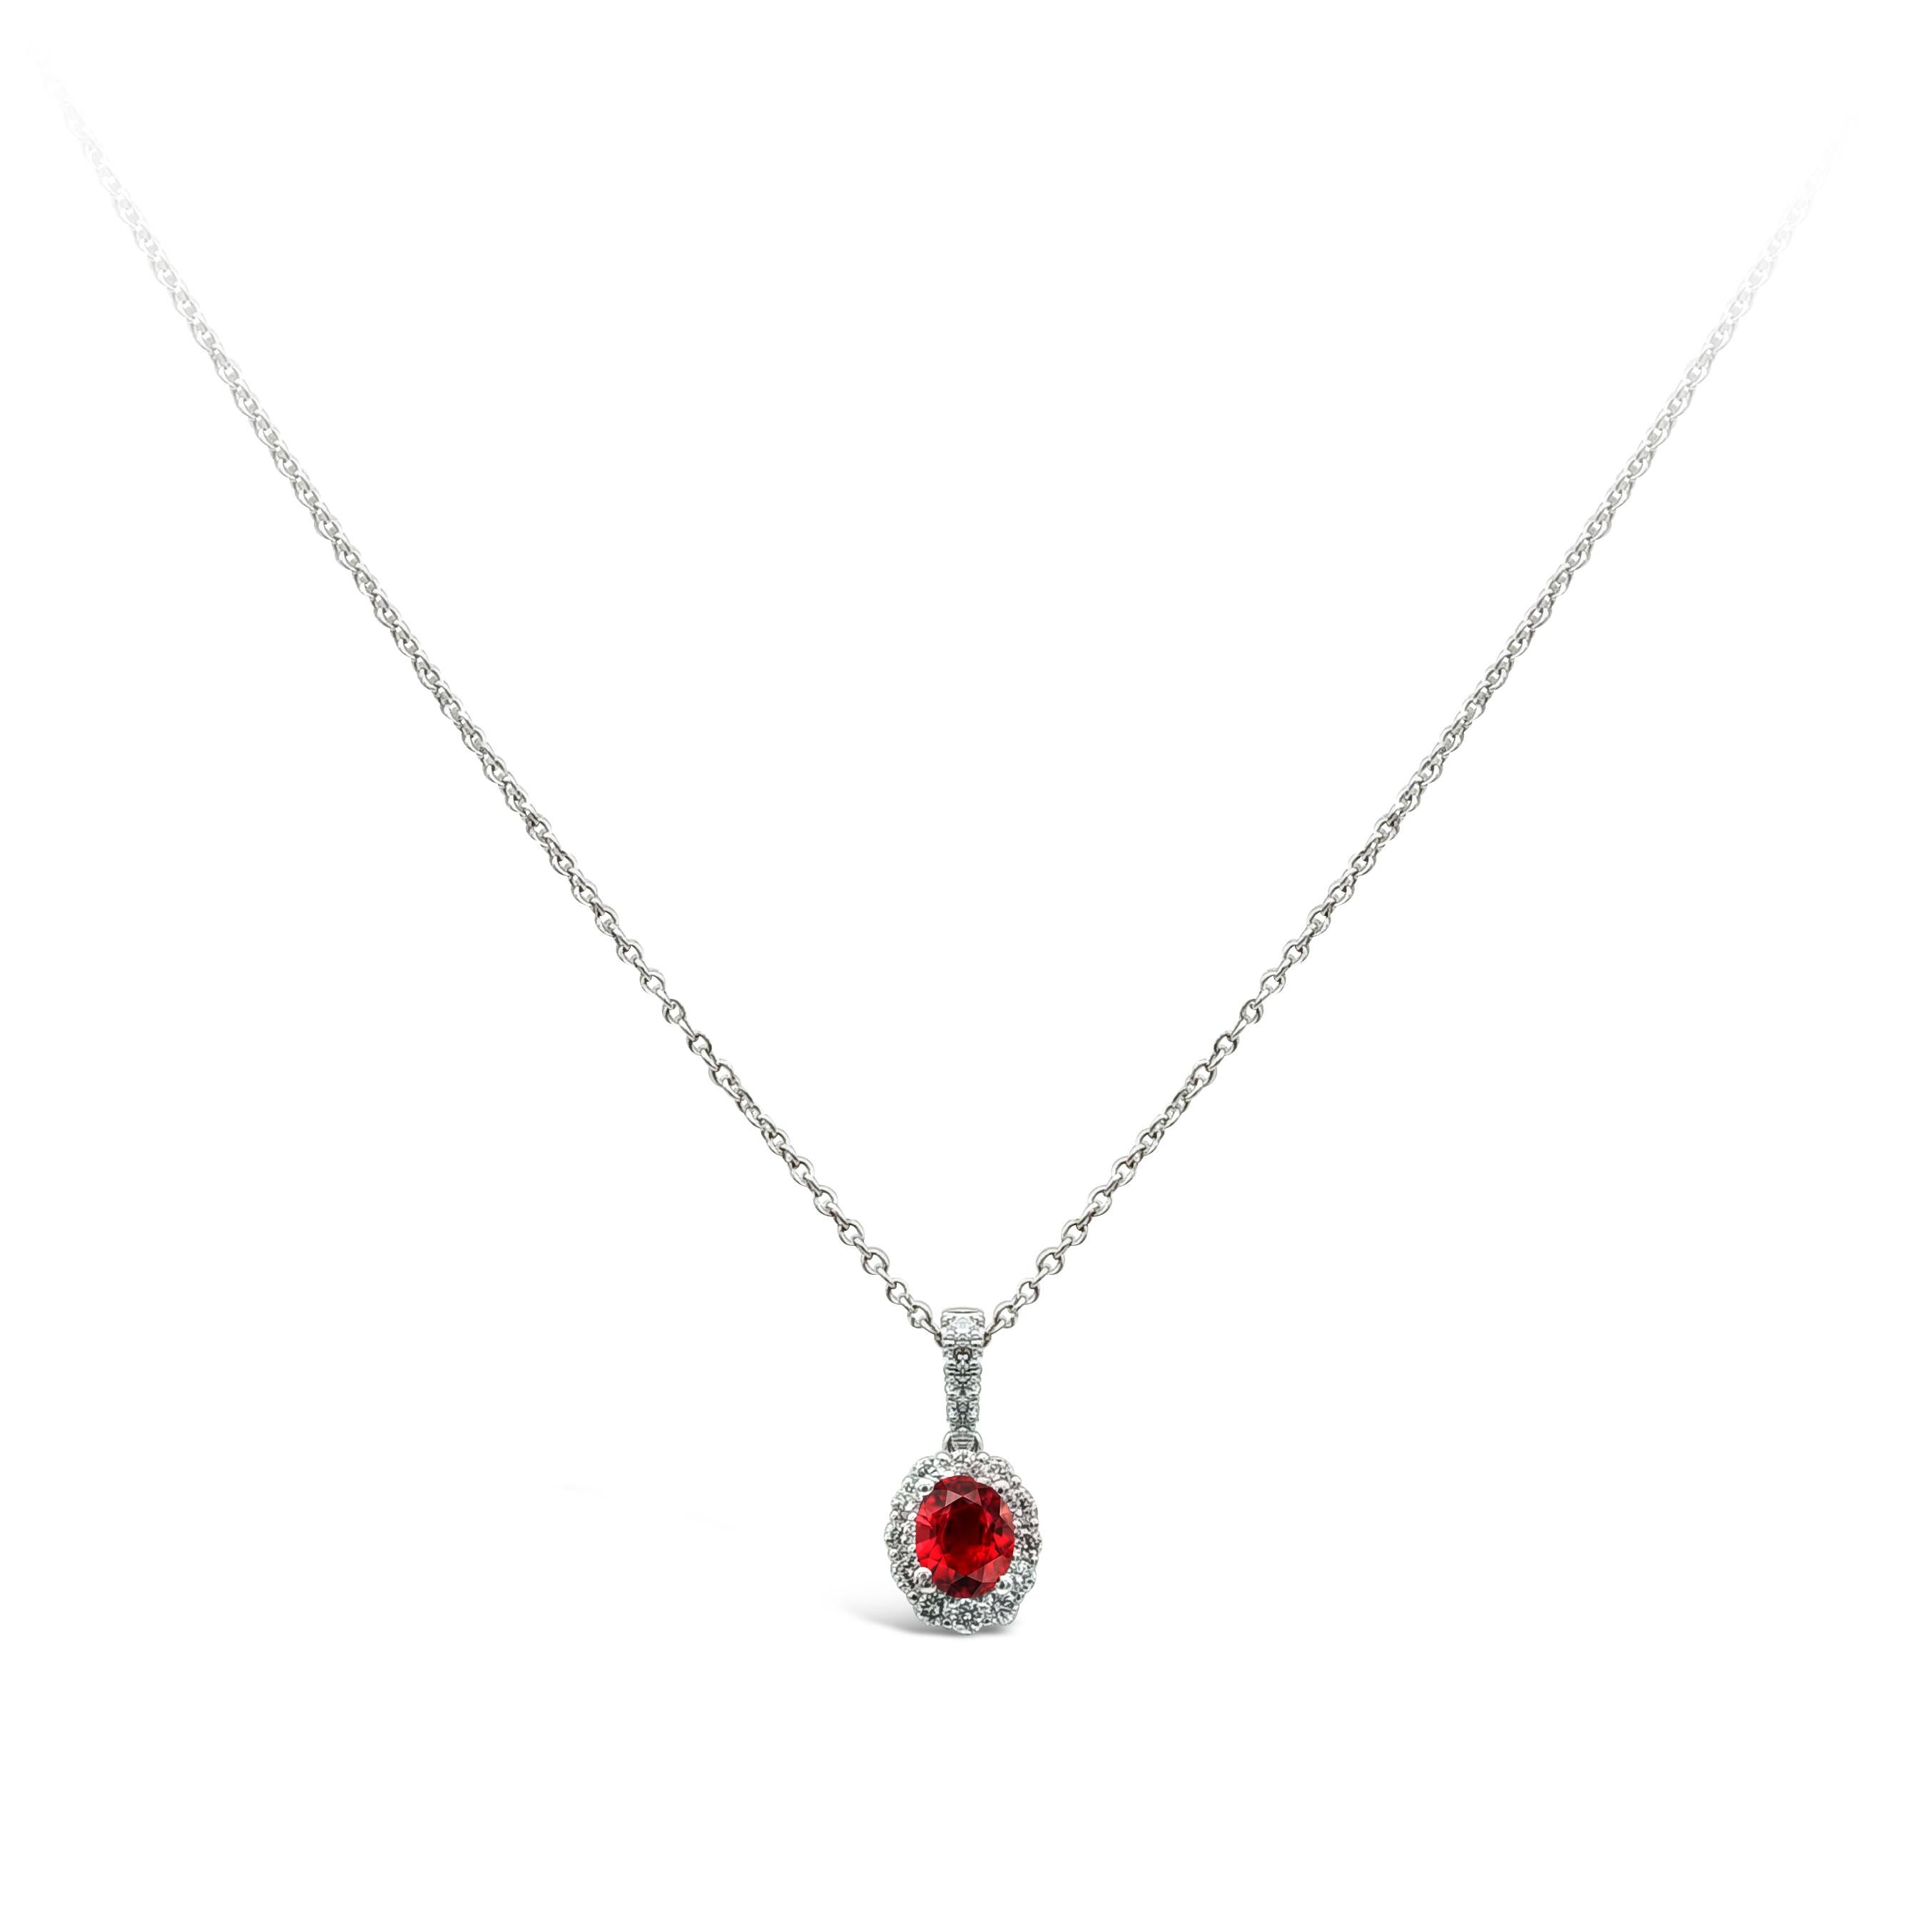 This classy and unique halo pendant necklace showcases an oval cut ruby weighing 0.41 carat, embellished by 17 pieces of round diamonds, weighing 0.18 carat total, F color and VS in clarity. Made with 14k and 18K White Gold. Suspended on 18 inches